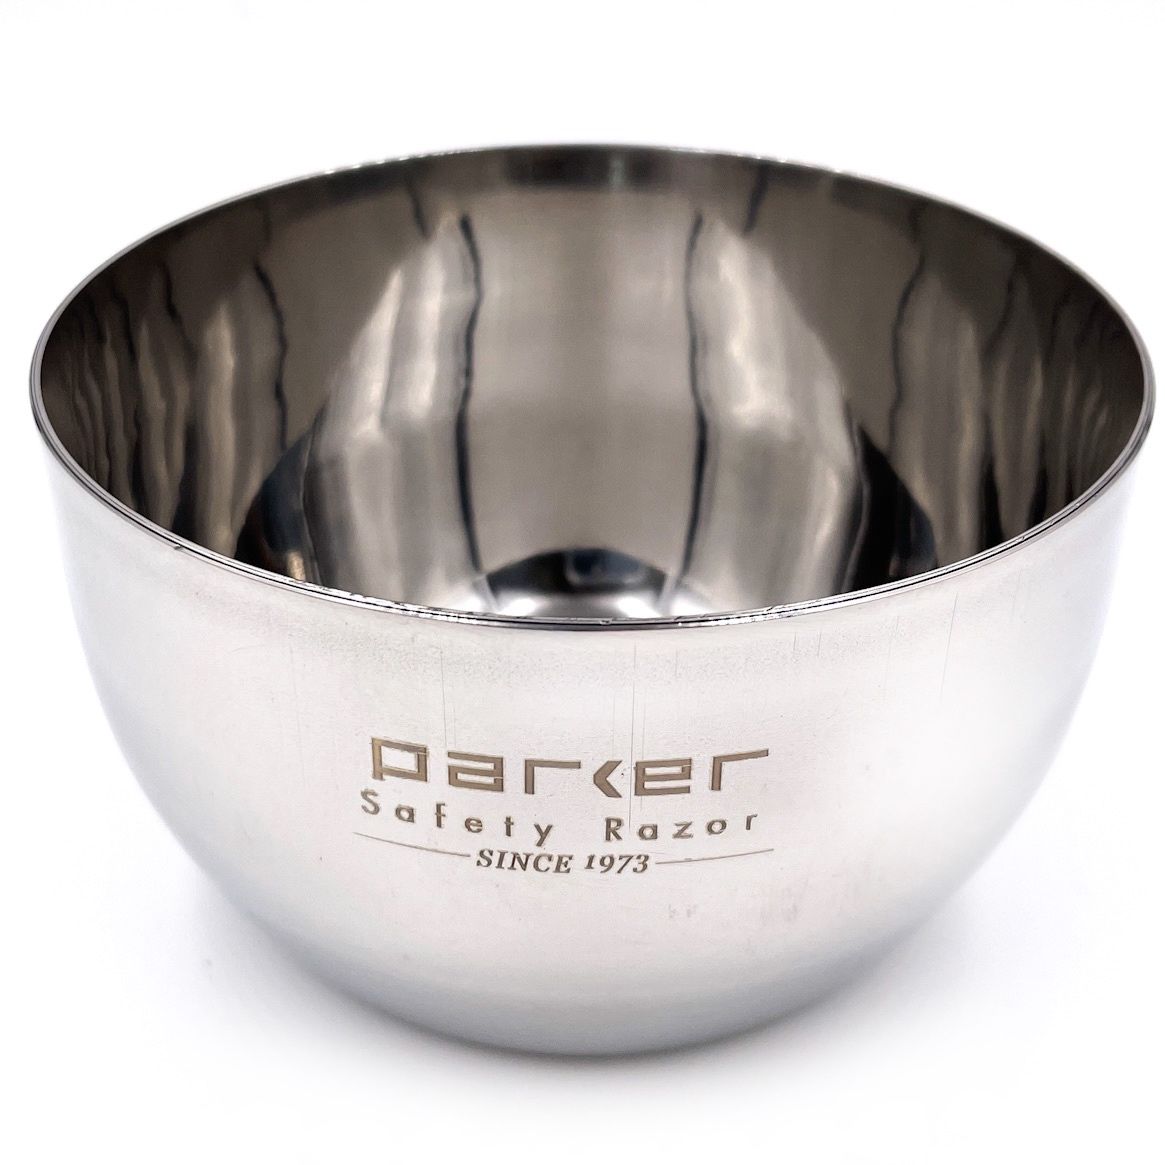 Stainless Steel Shave Bowl